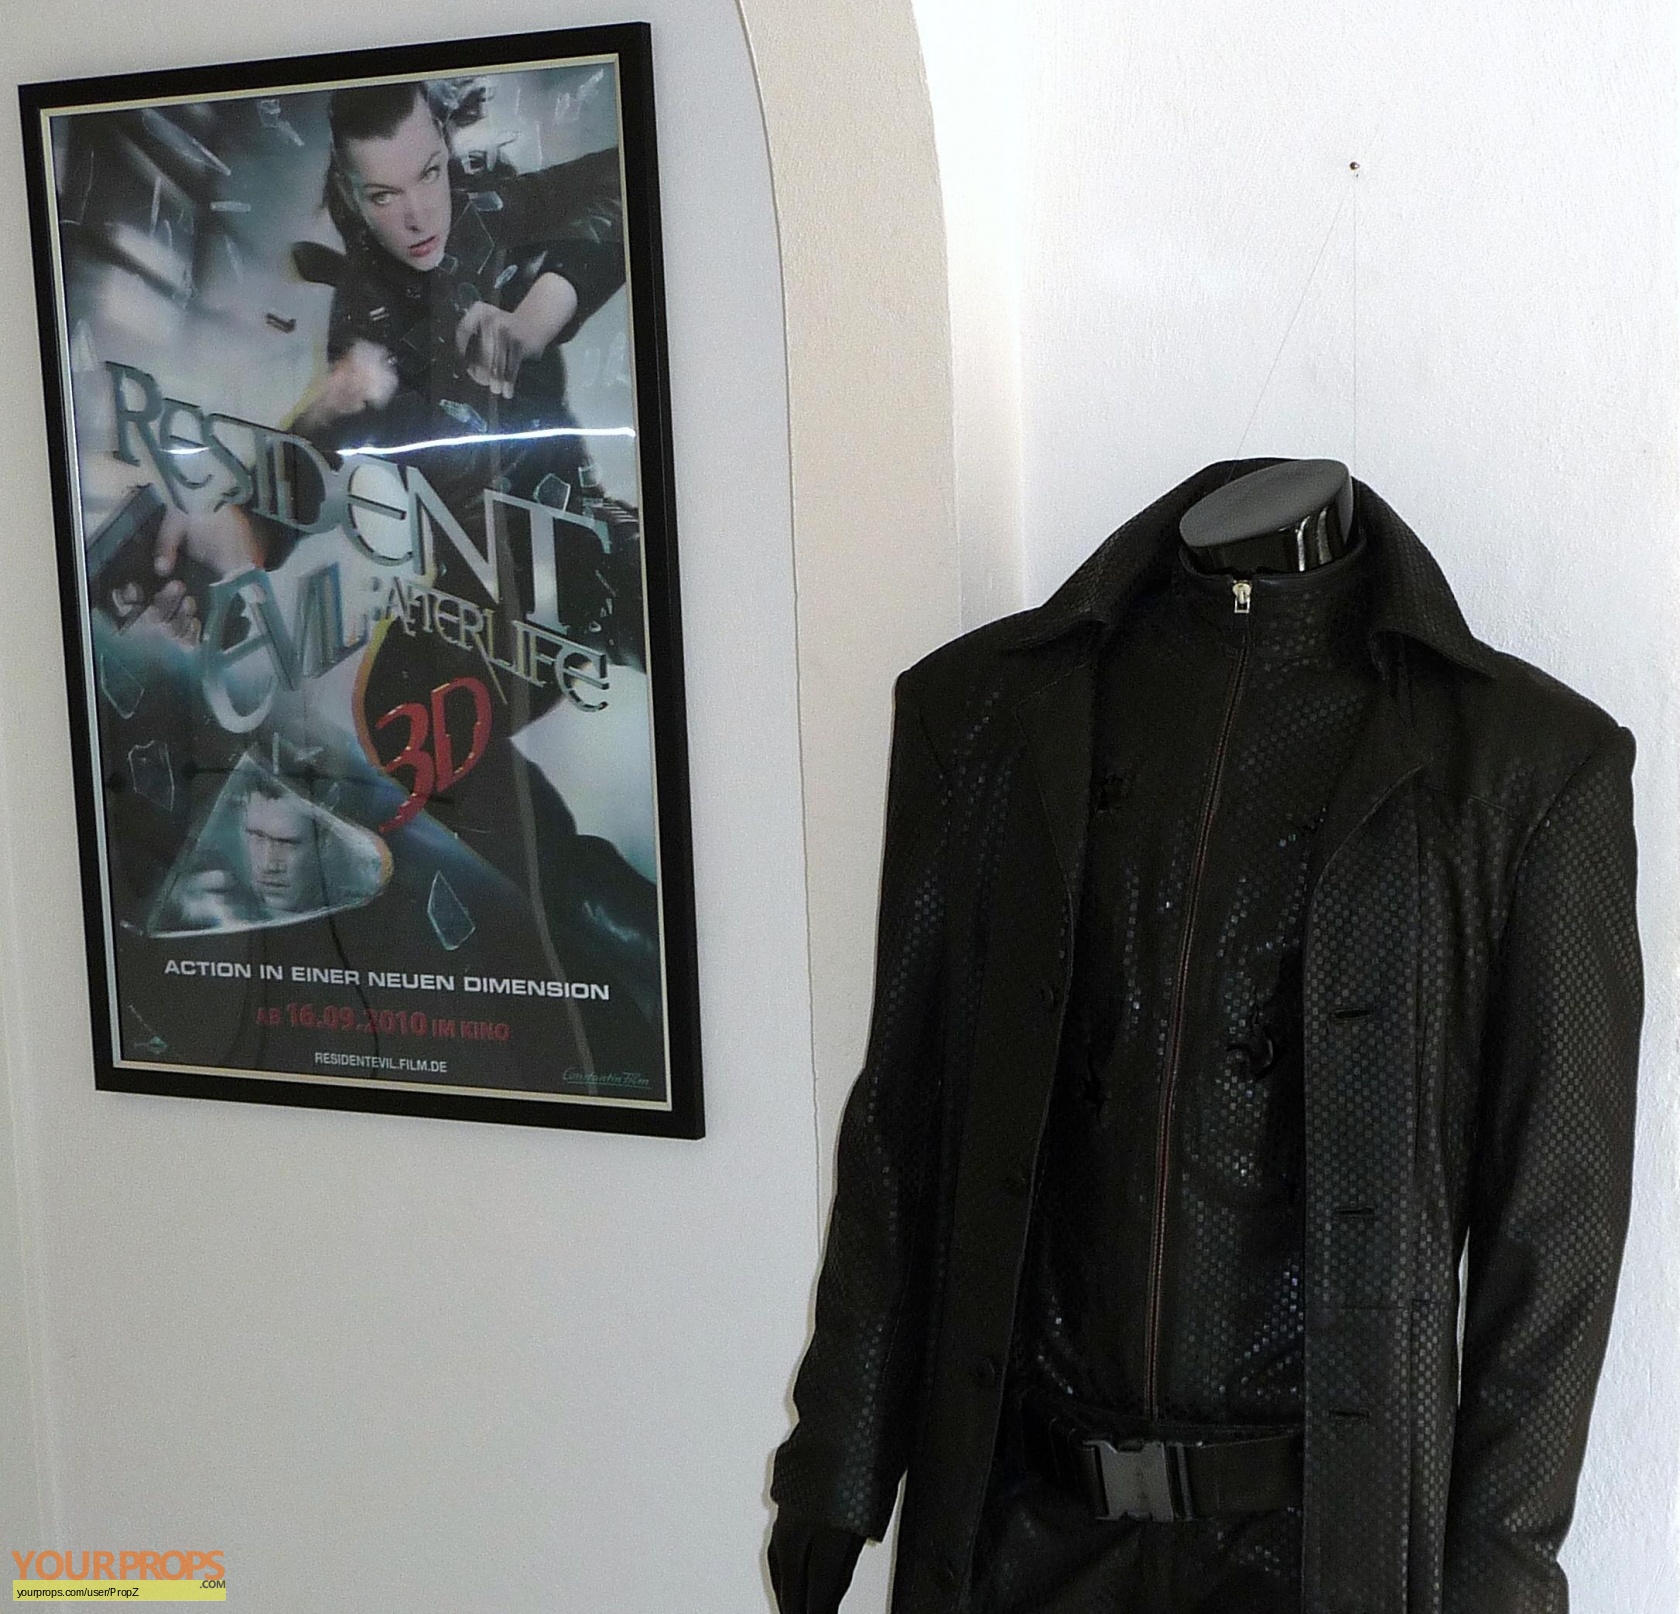 Resident Evil: The Final Chapter Resident Evil: The Final Chapter Wesker  (Shawn Roberts) Movie Costumes original movie costume